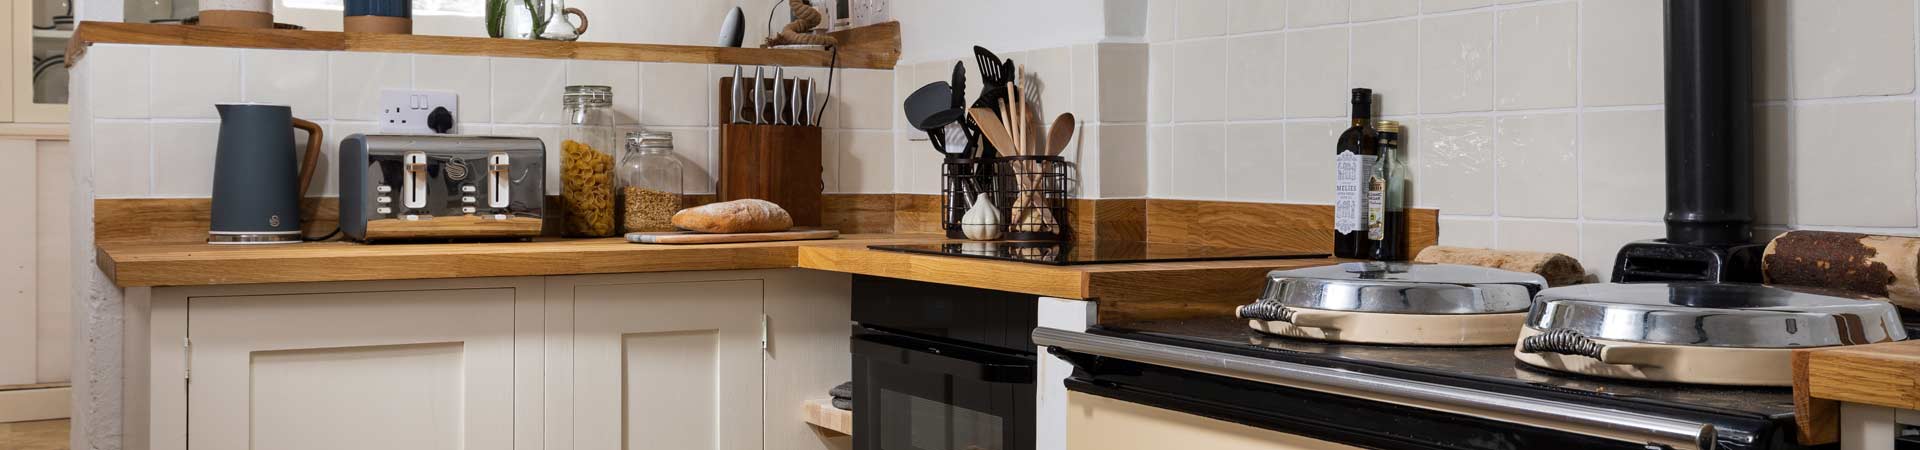 Top 10 cottages with an Aga